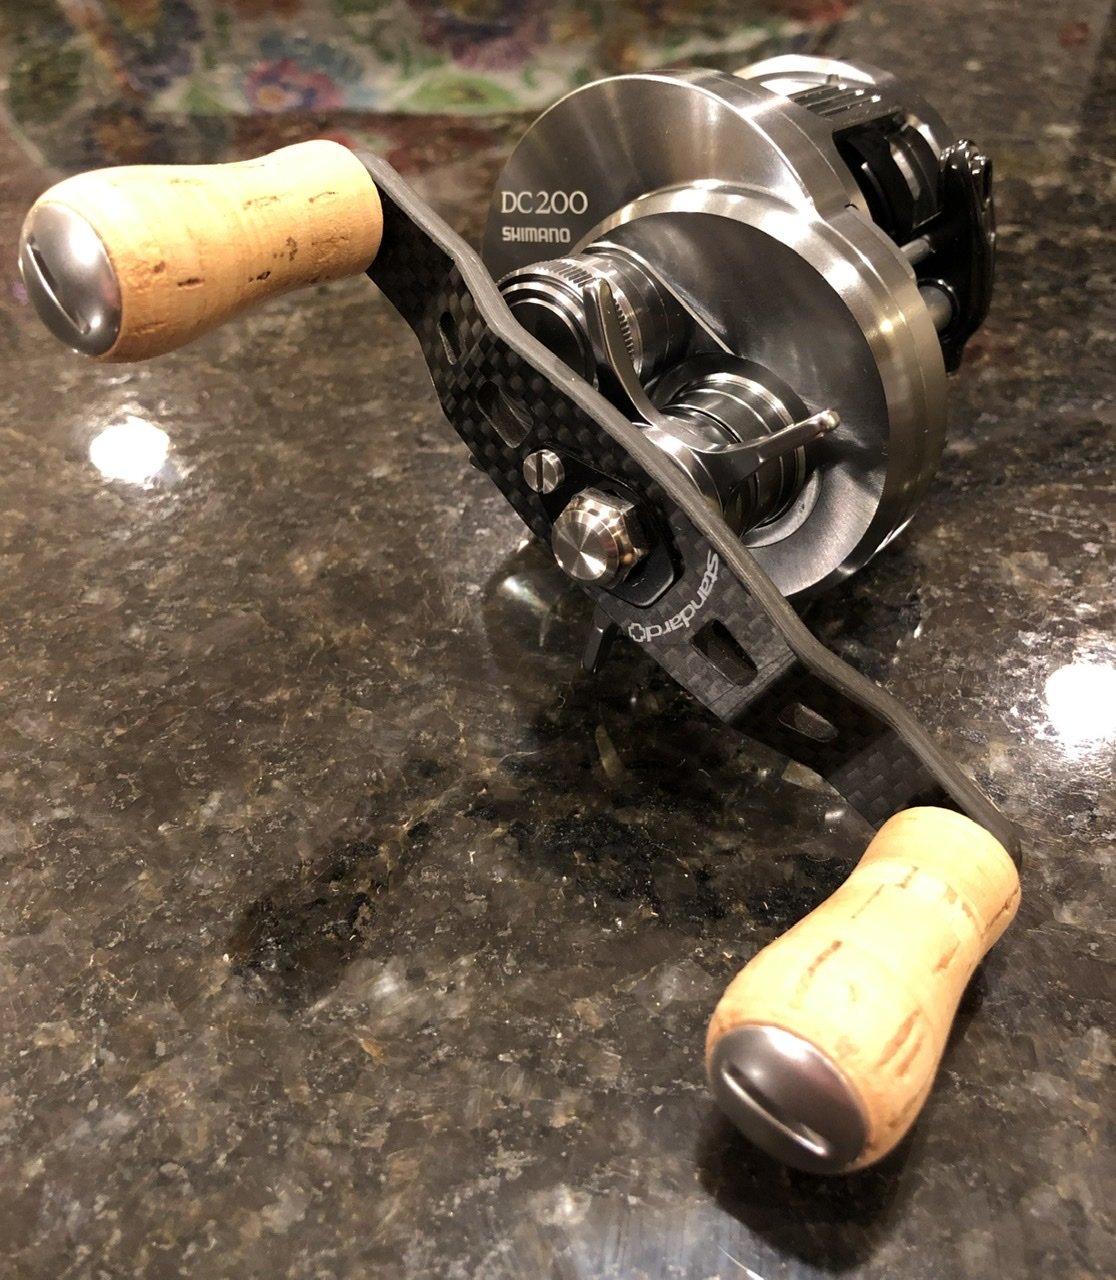 Show Off Your Swimbait Setup - Page 28 - The Underground